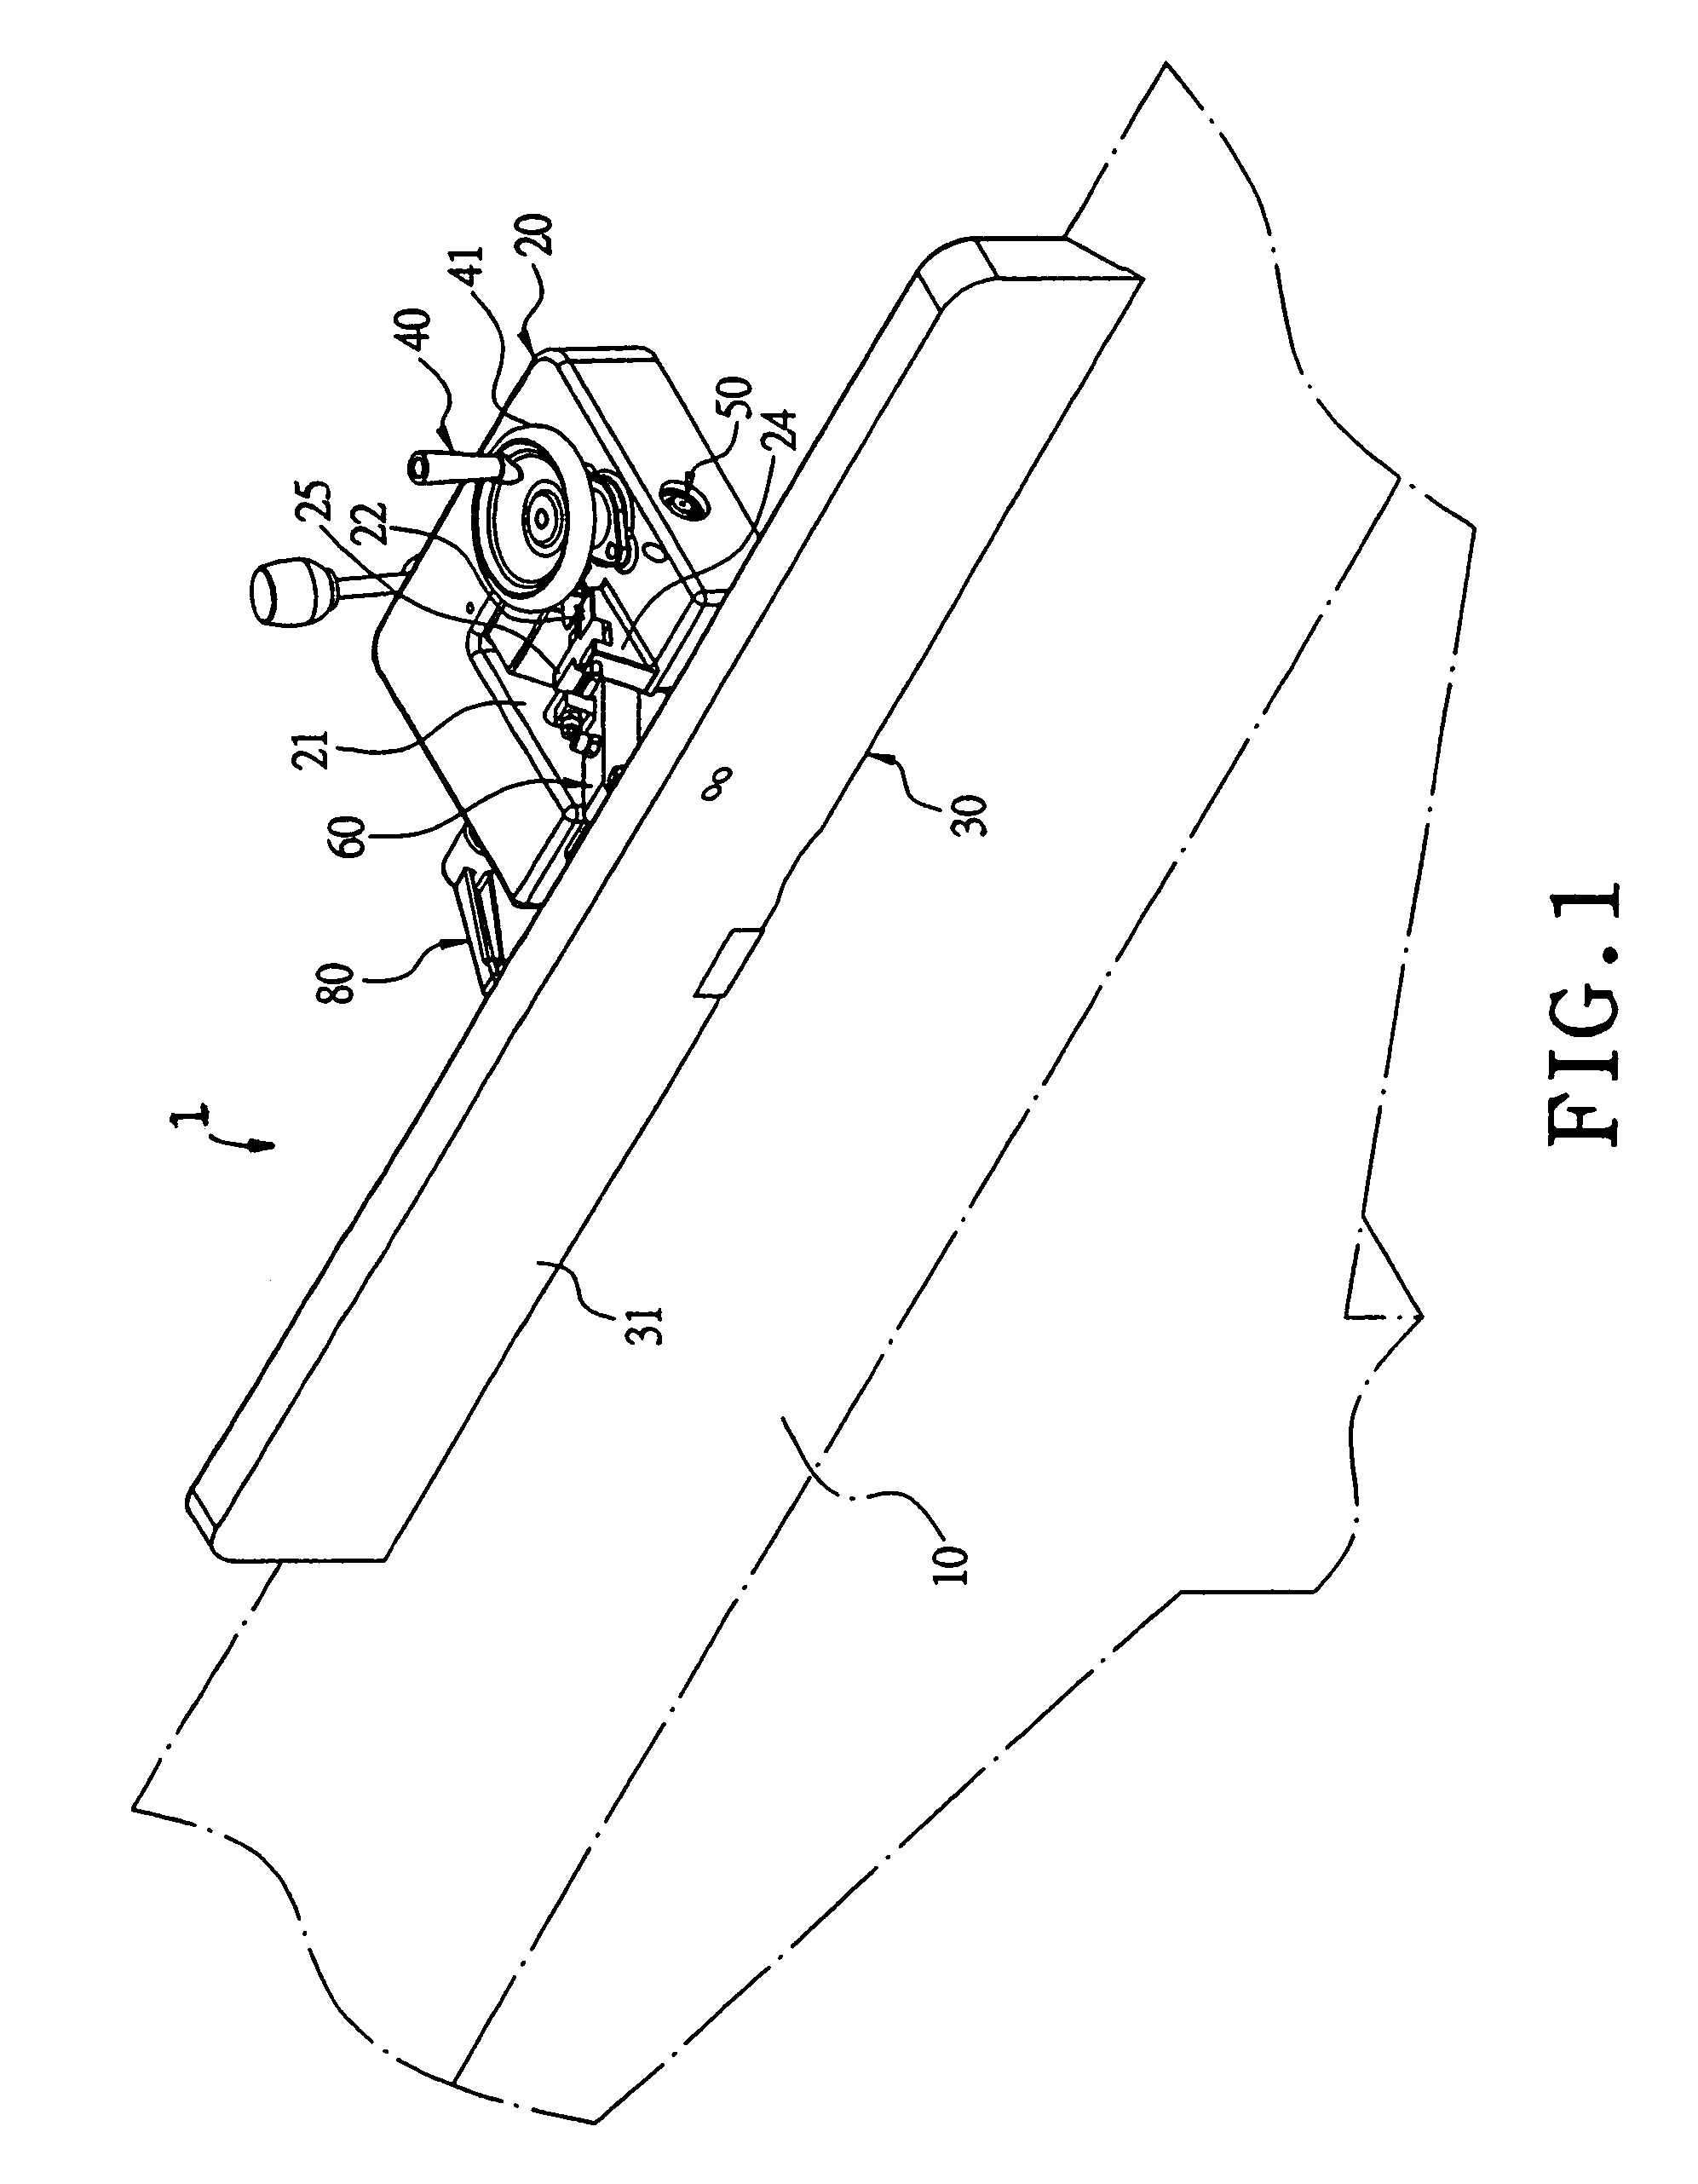 Micro-adjustment device for the angle stop plank of a planer